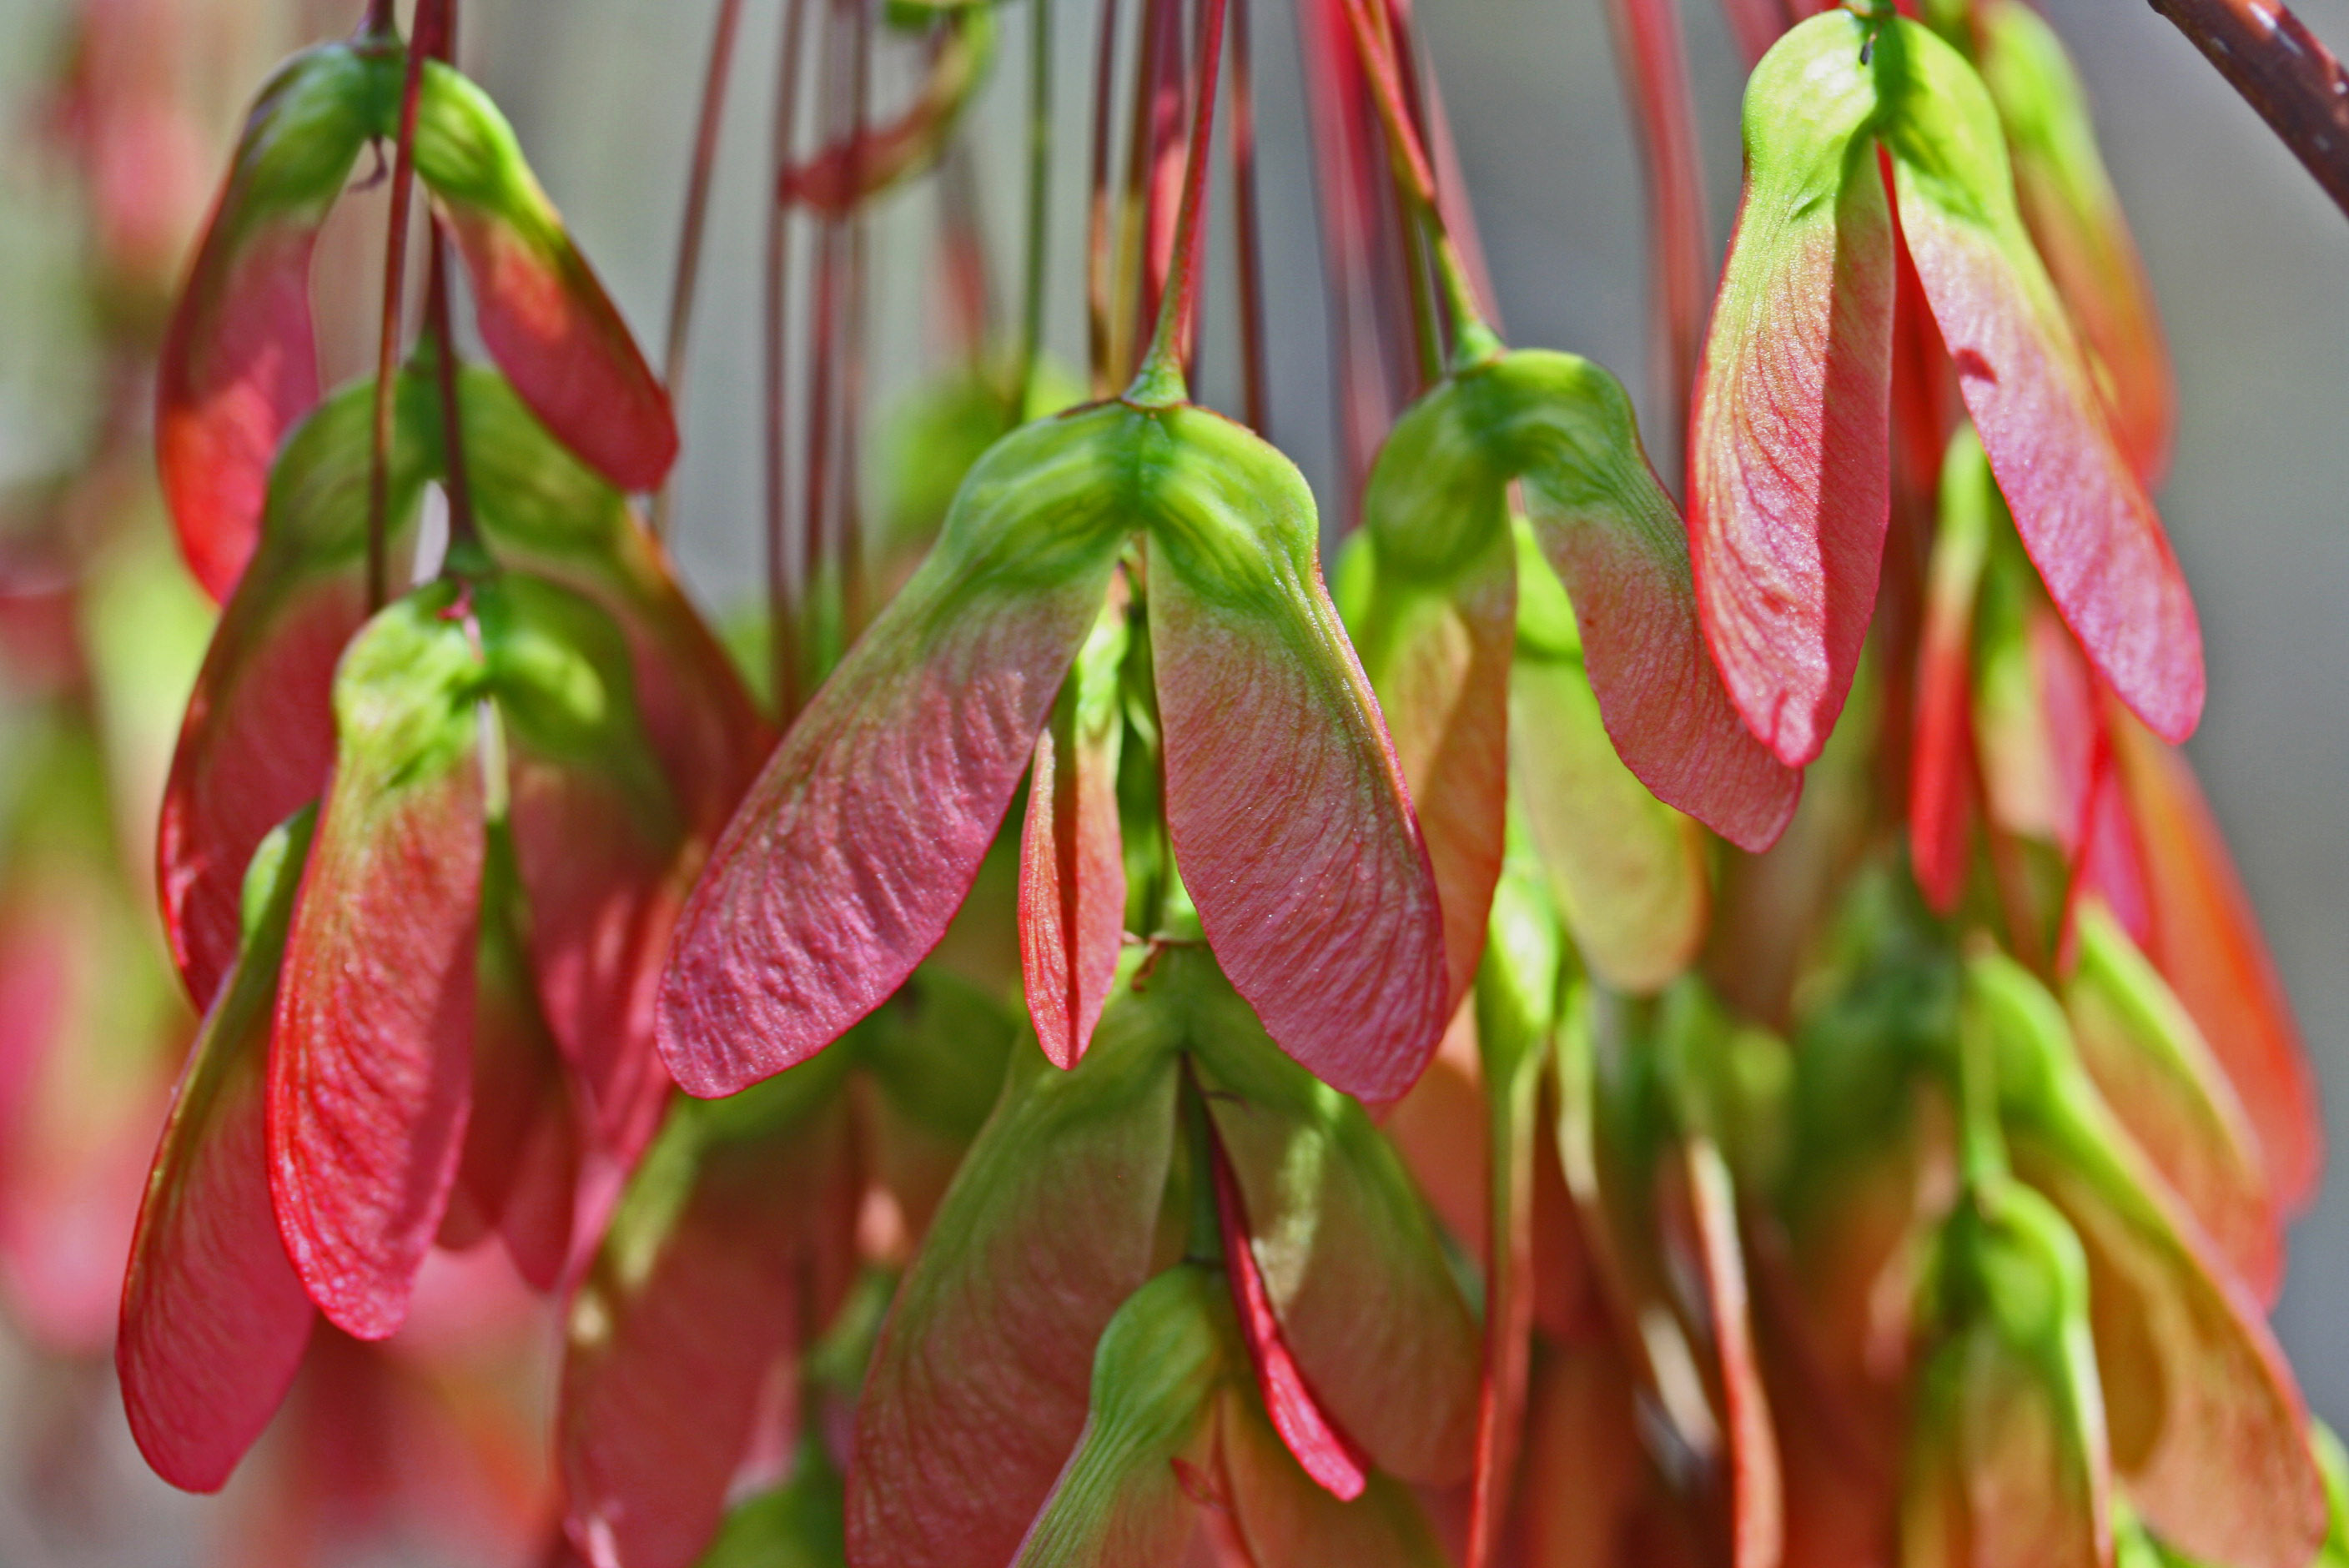 Maple Seed Pods in Brightly Colored Groups tb0513fcr.jpg